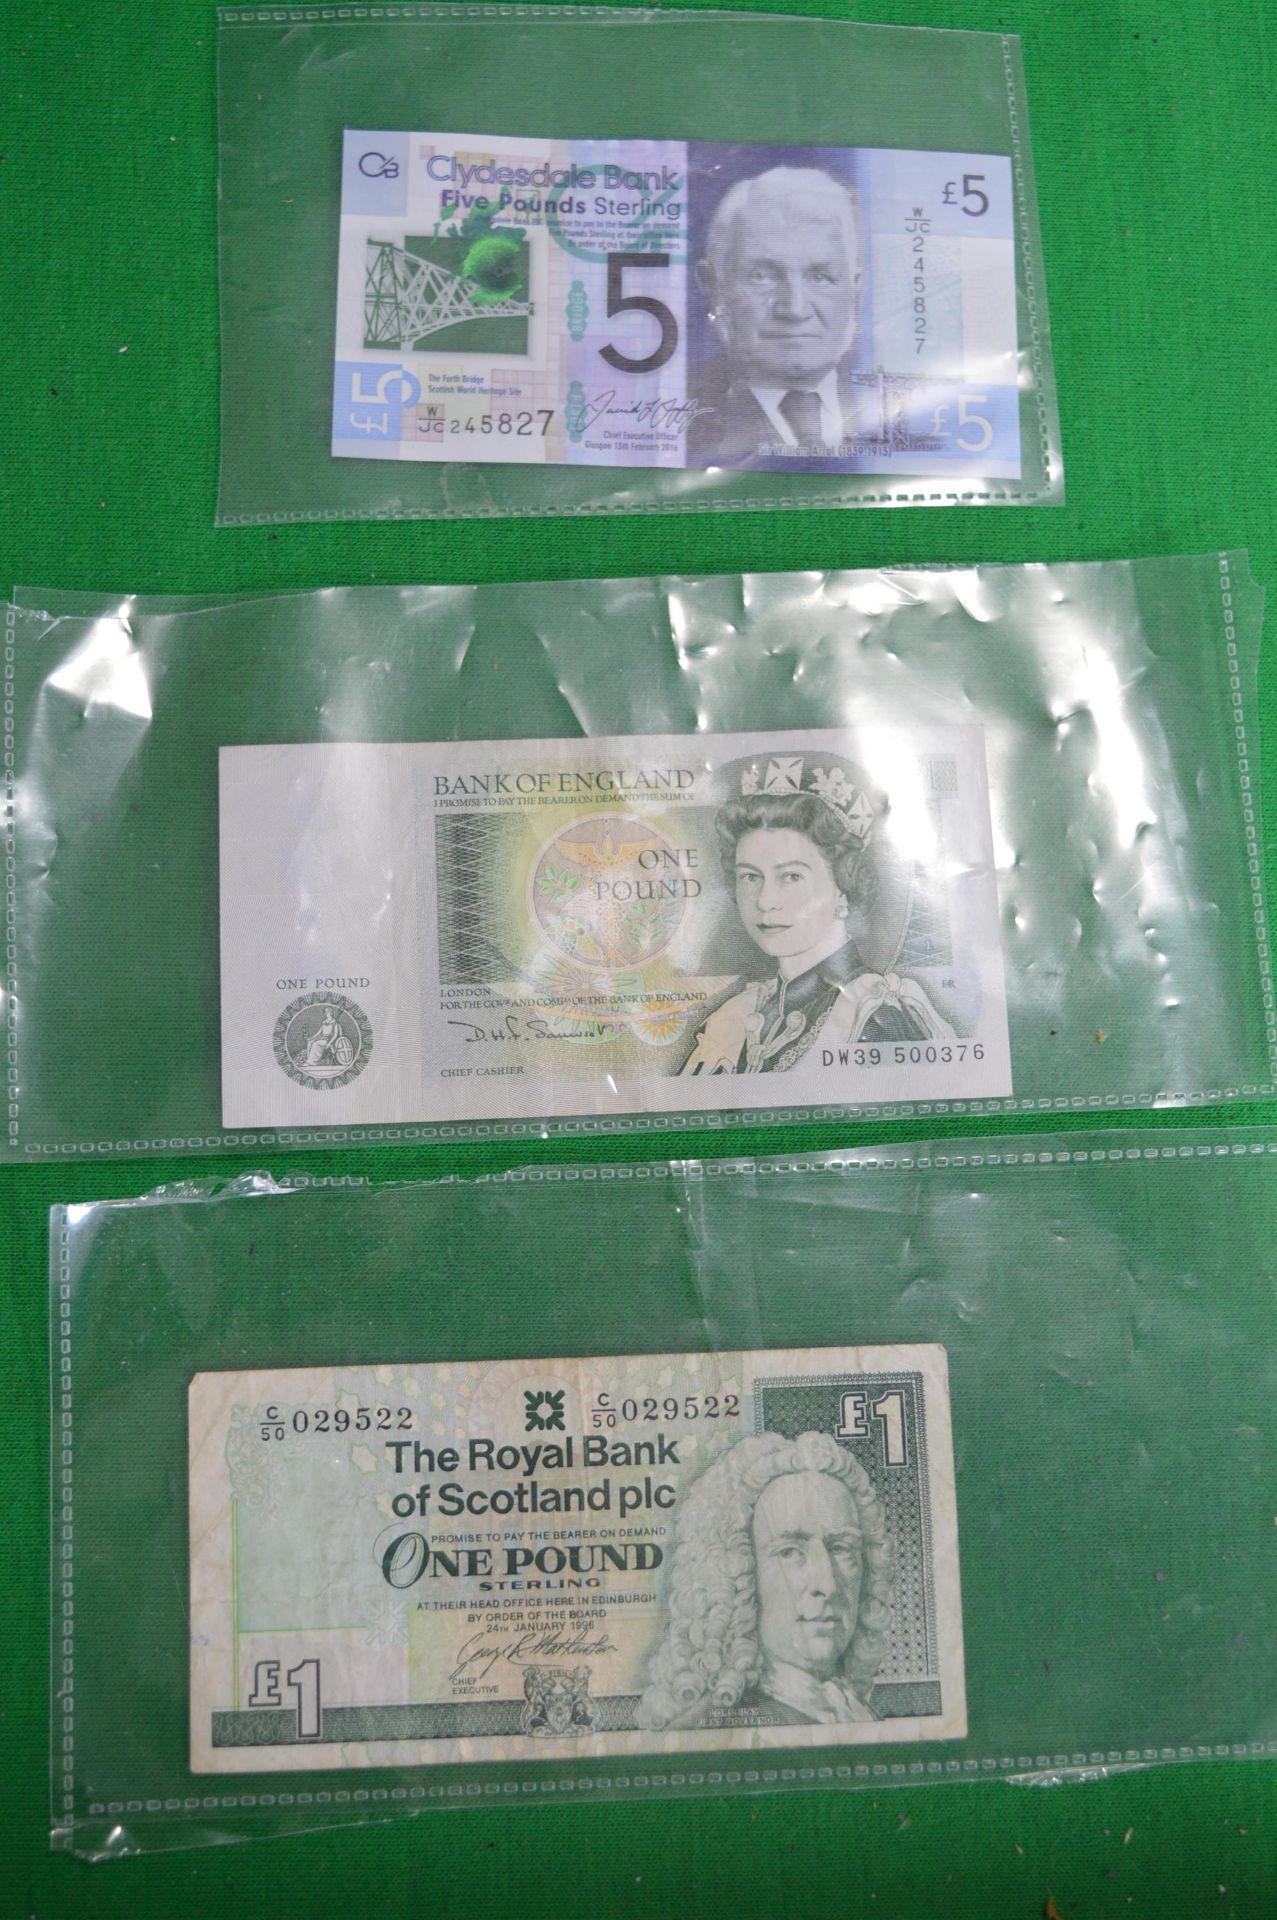 Scottish £5 Note and £1 Note, plus UK £1 Note